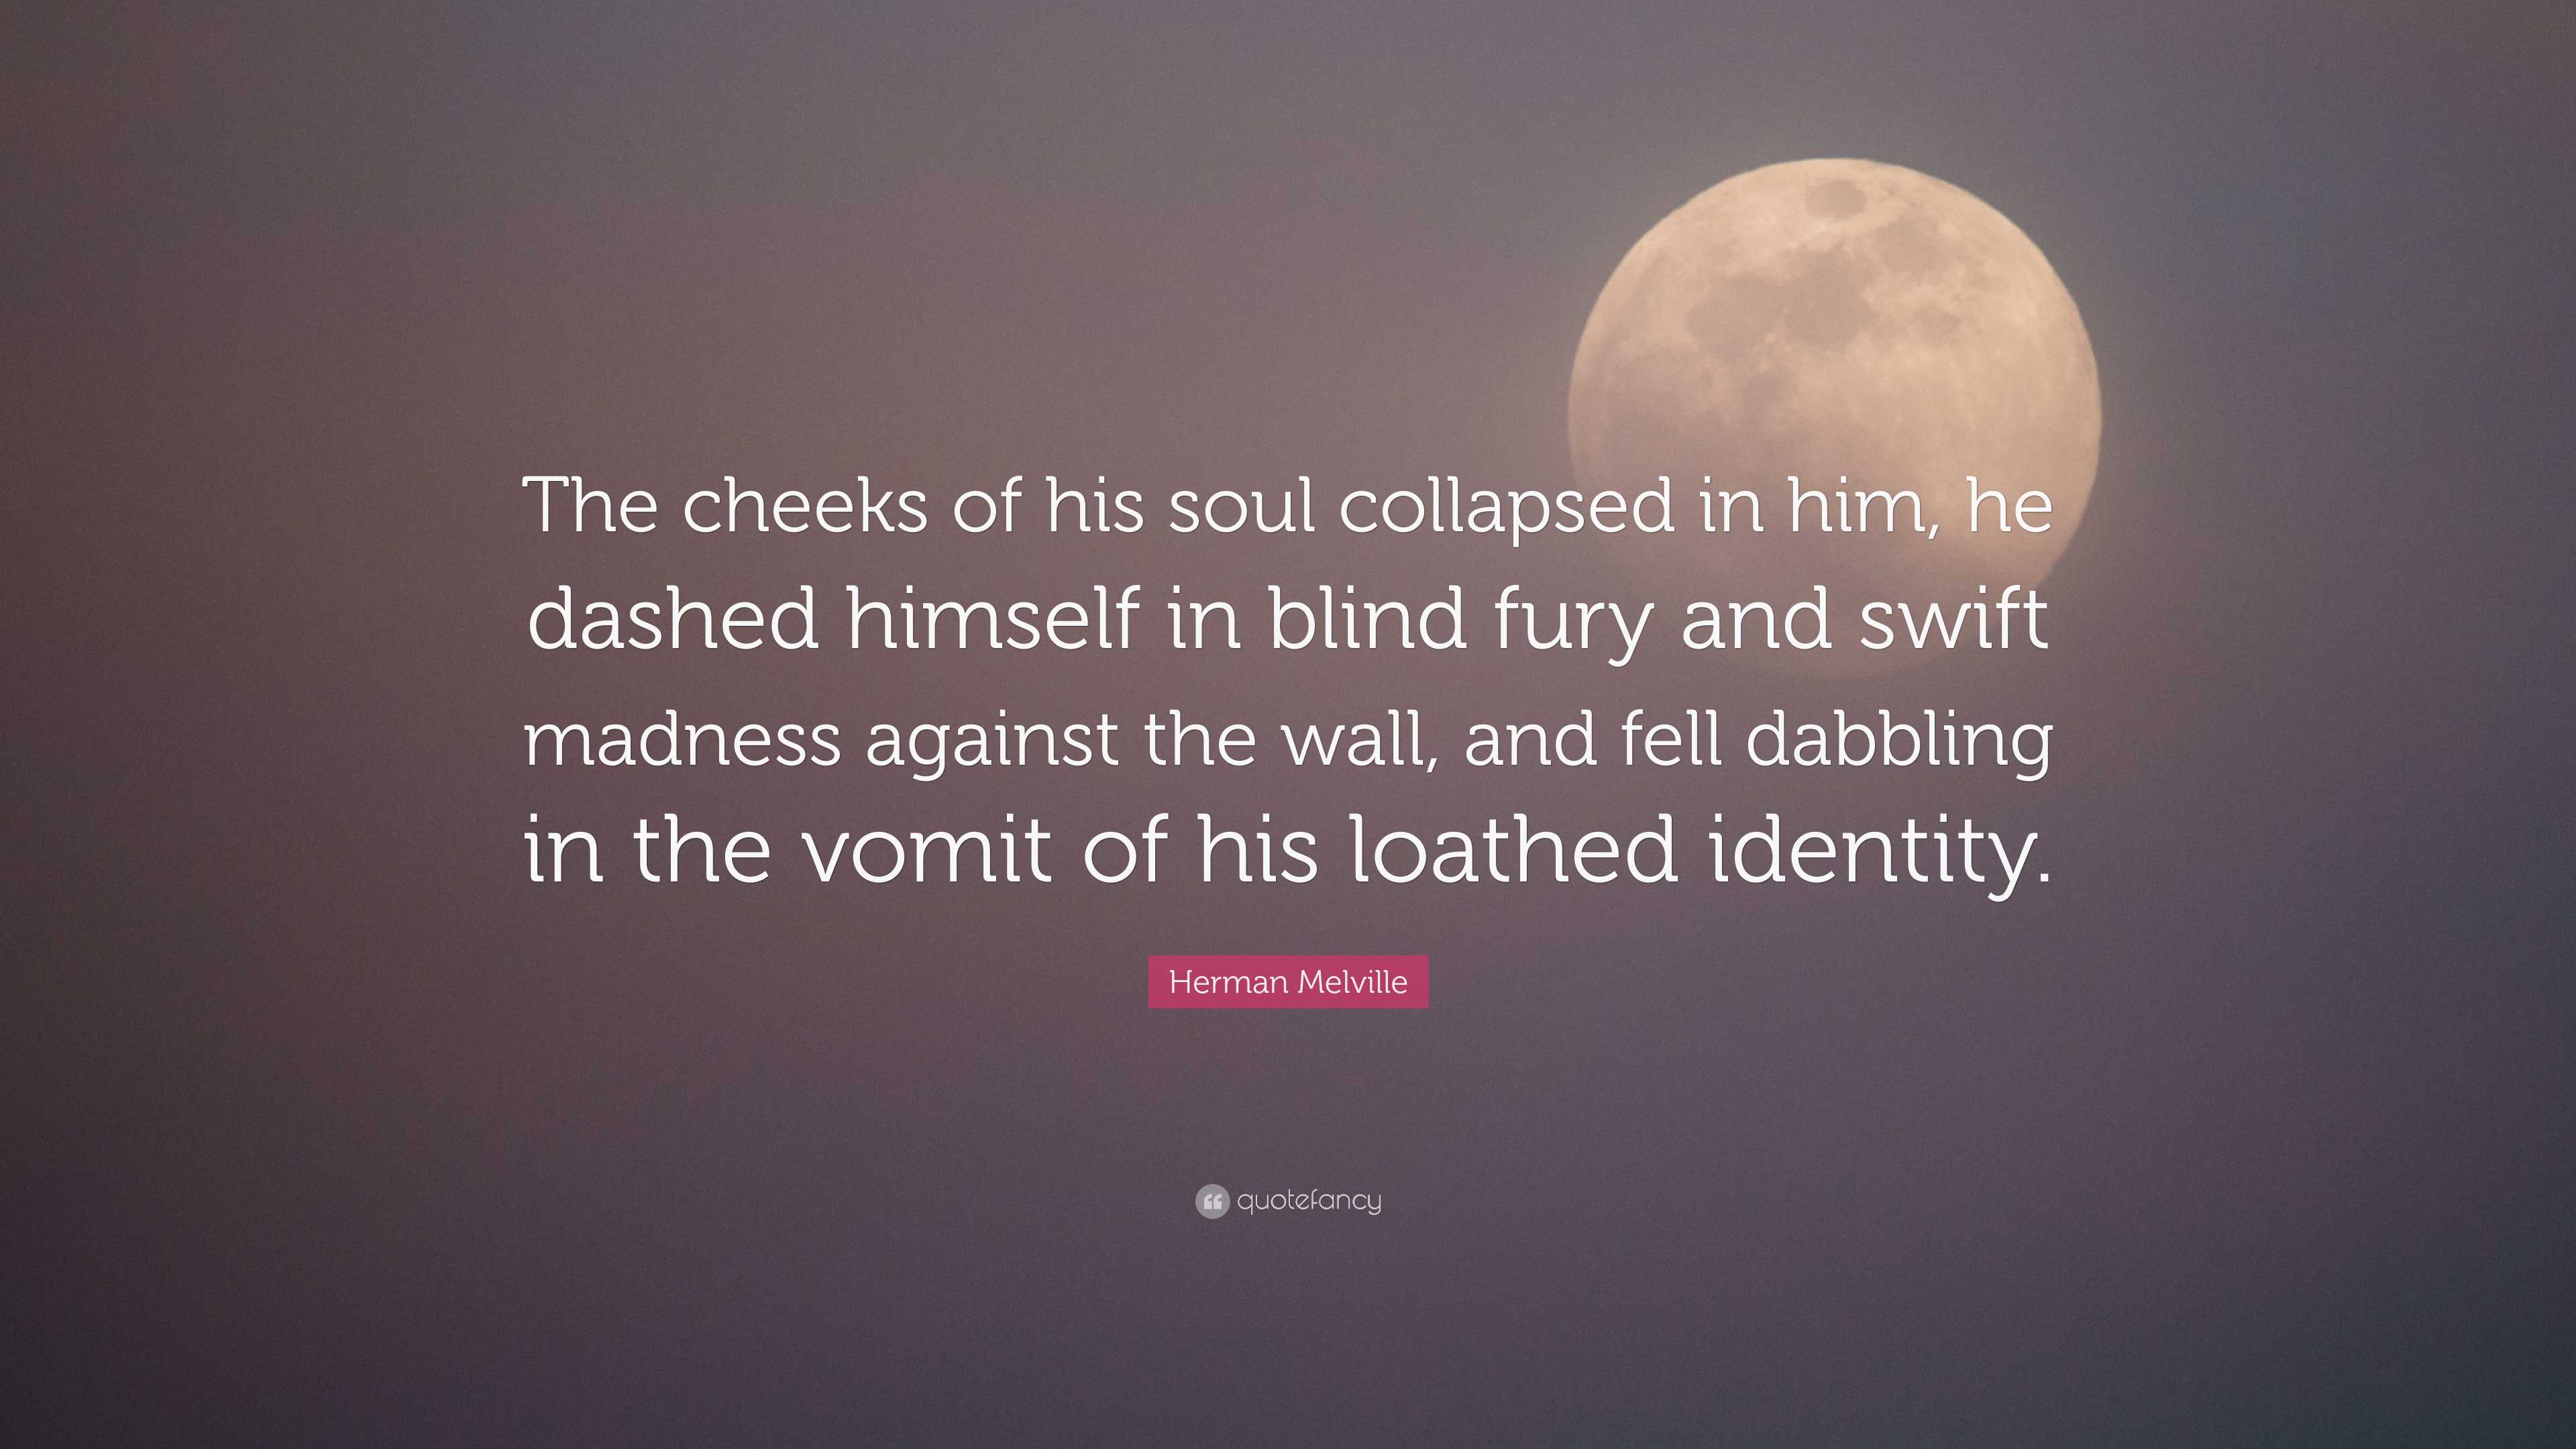 Herman Melville Quote: “The cheeks of his soul collapsed in him, he ...